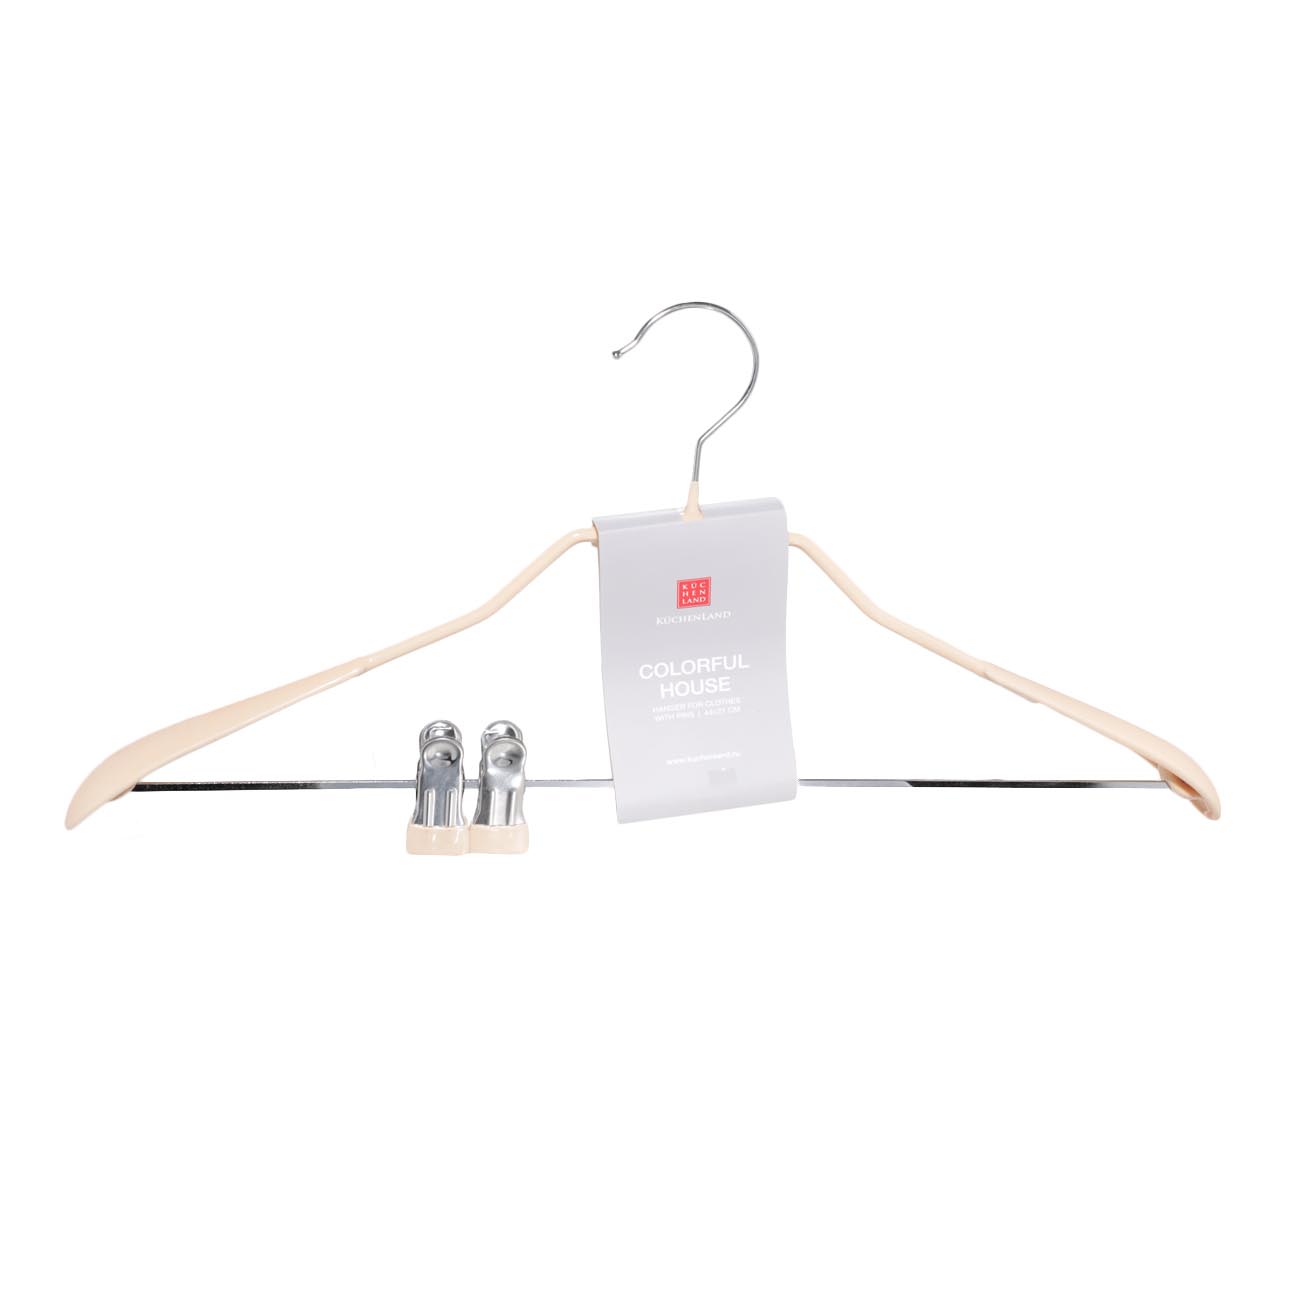 Hanger, 44 cm, with clips for trousers/skirts, metal coated, beige, Colorful house изображение № 2